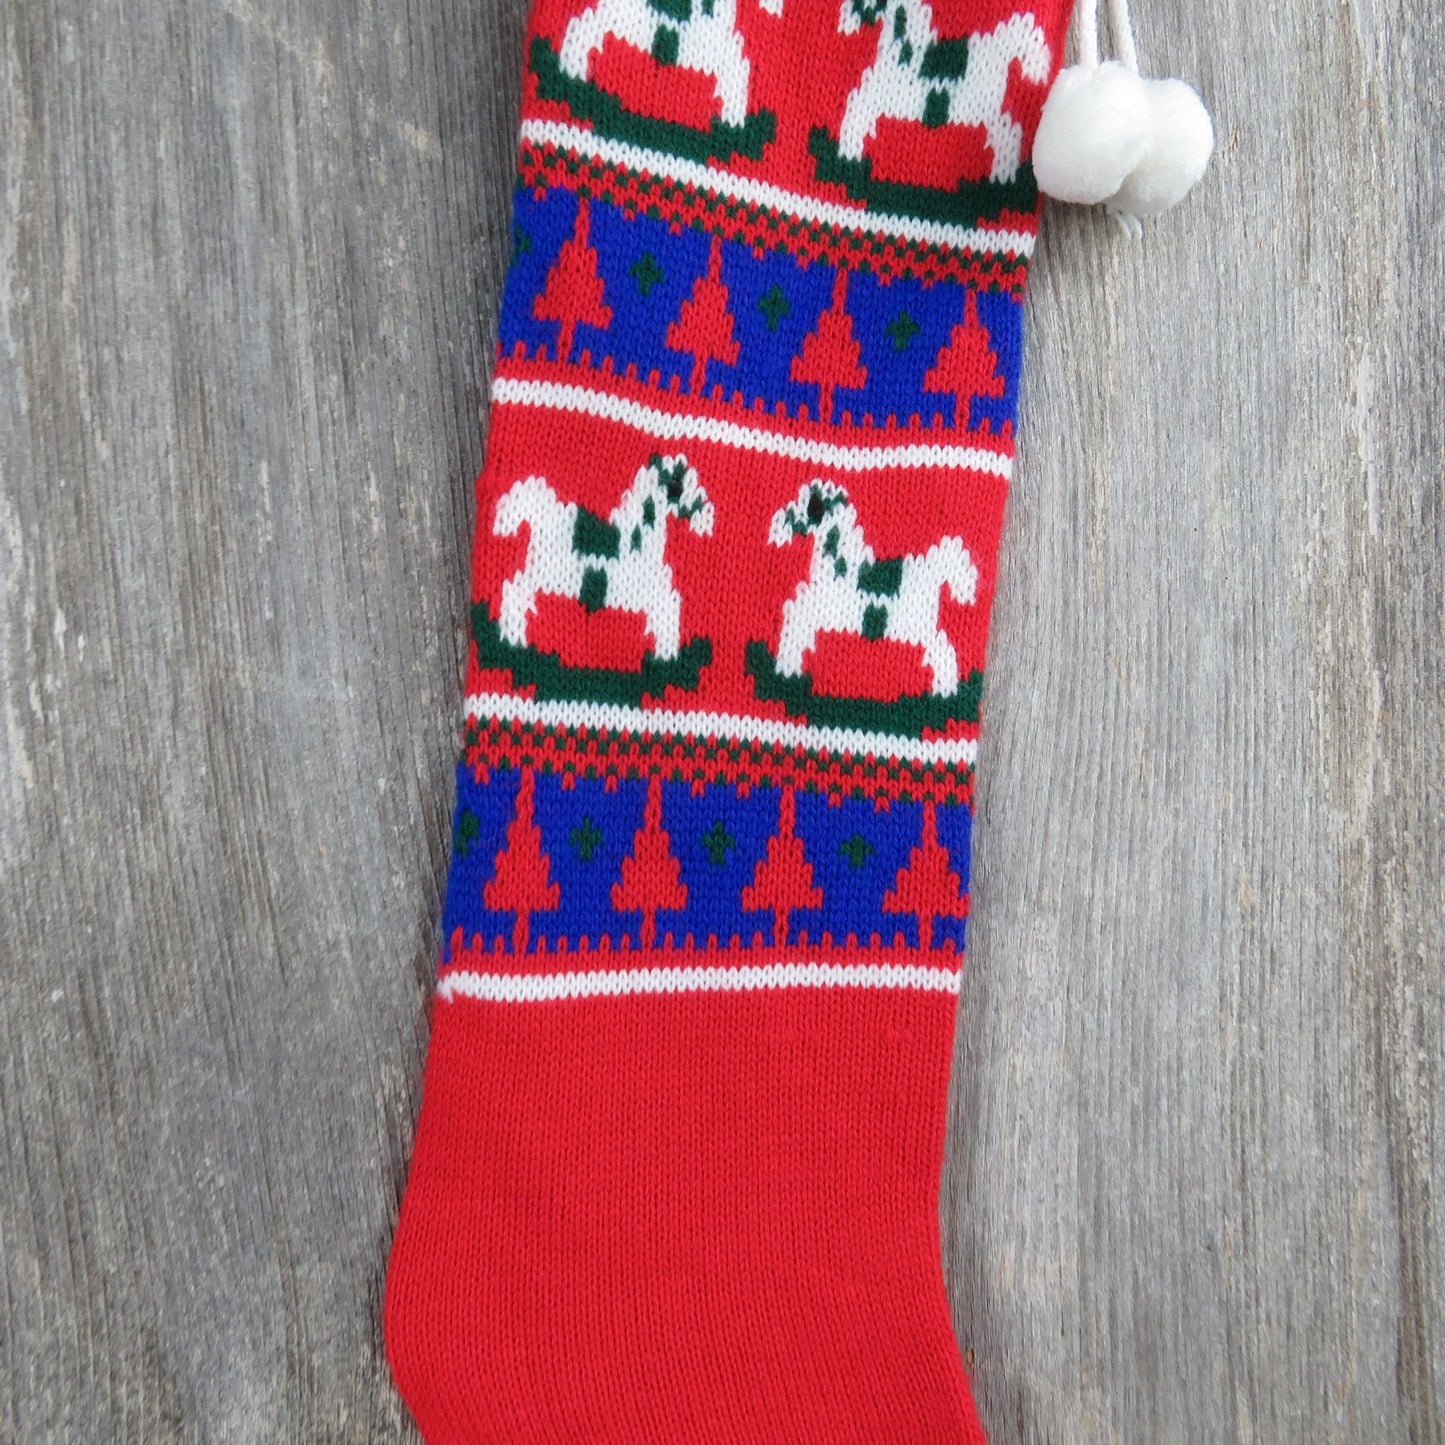 Vintage Rocking Horse Knit Stocking Christmas Knitted Red Blue White Holiday Home Decor